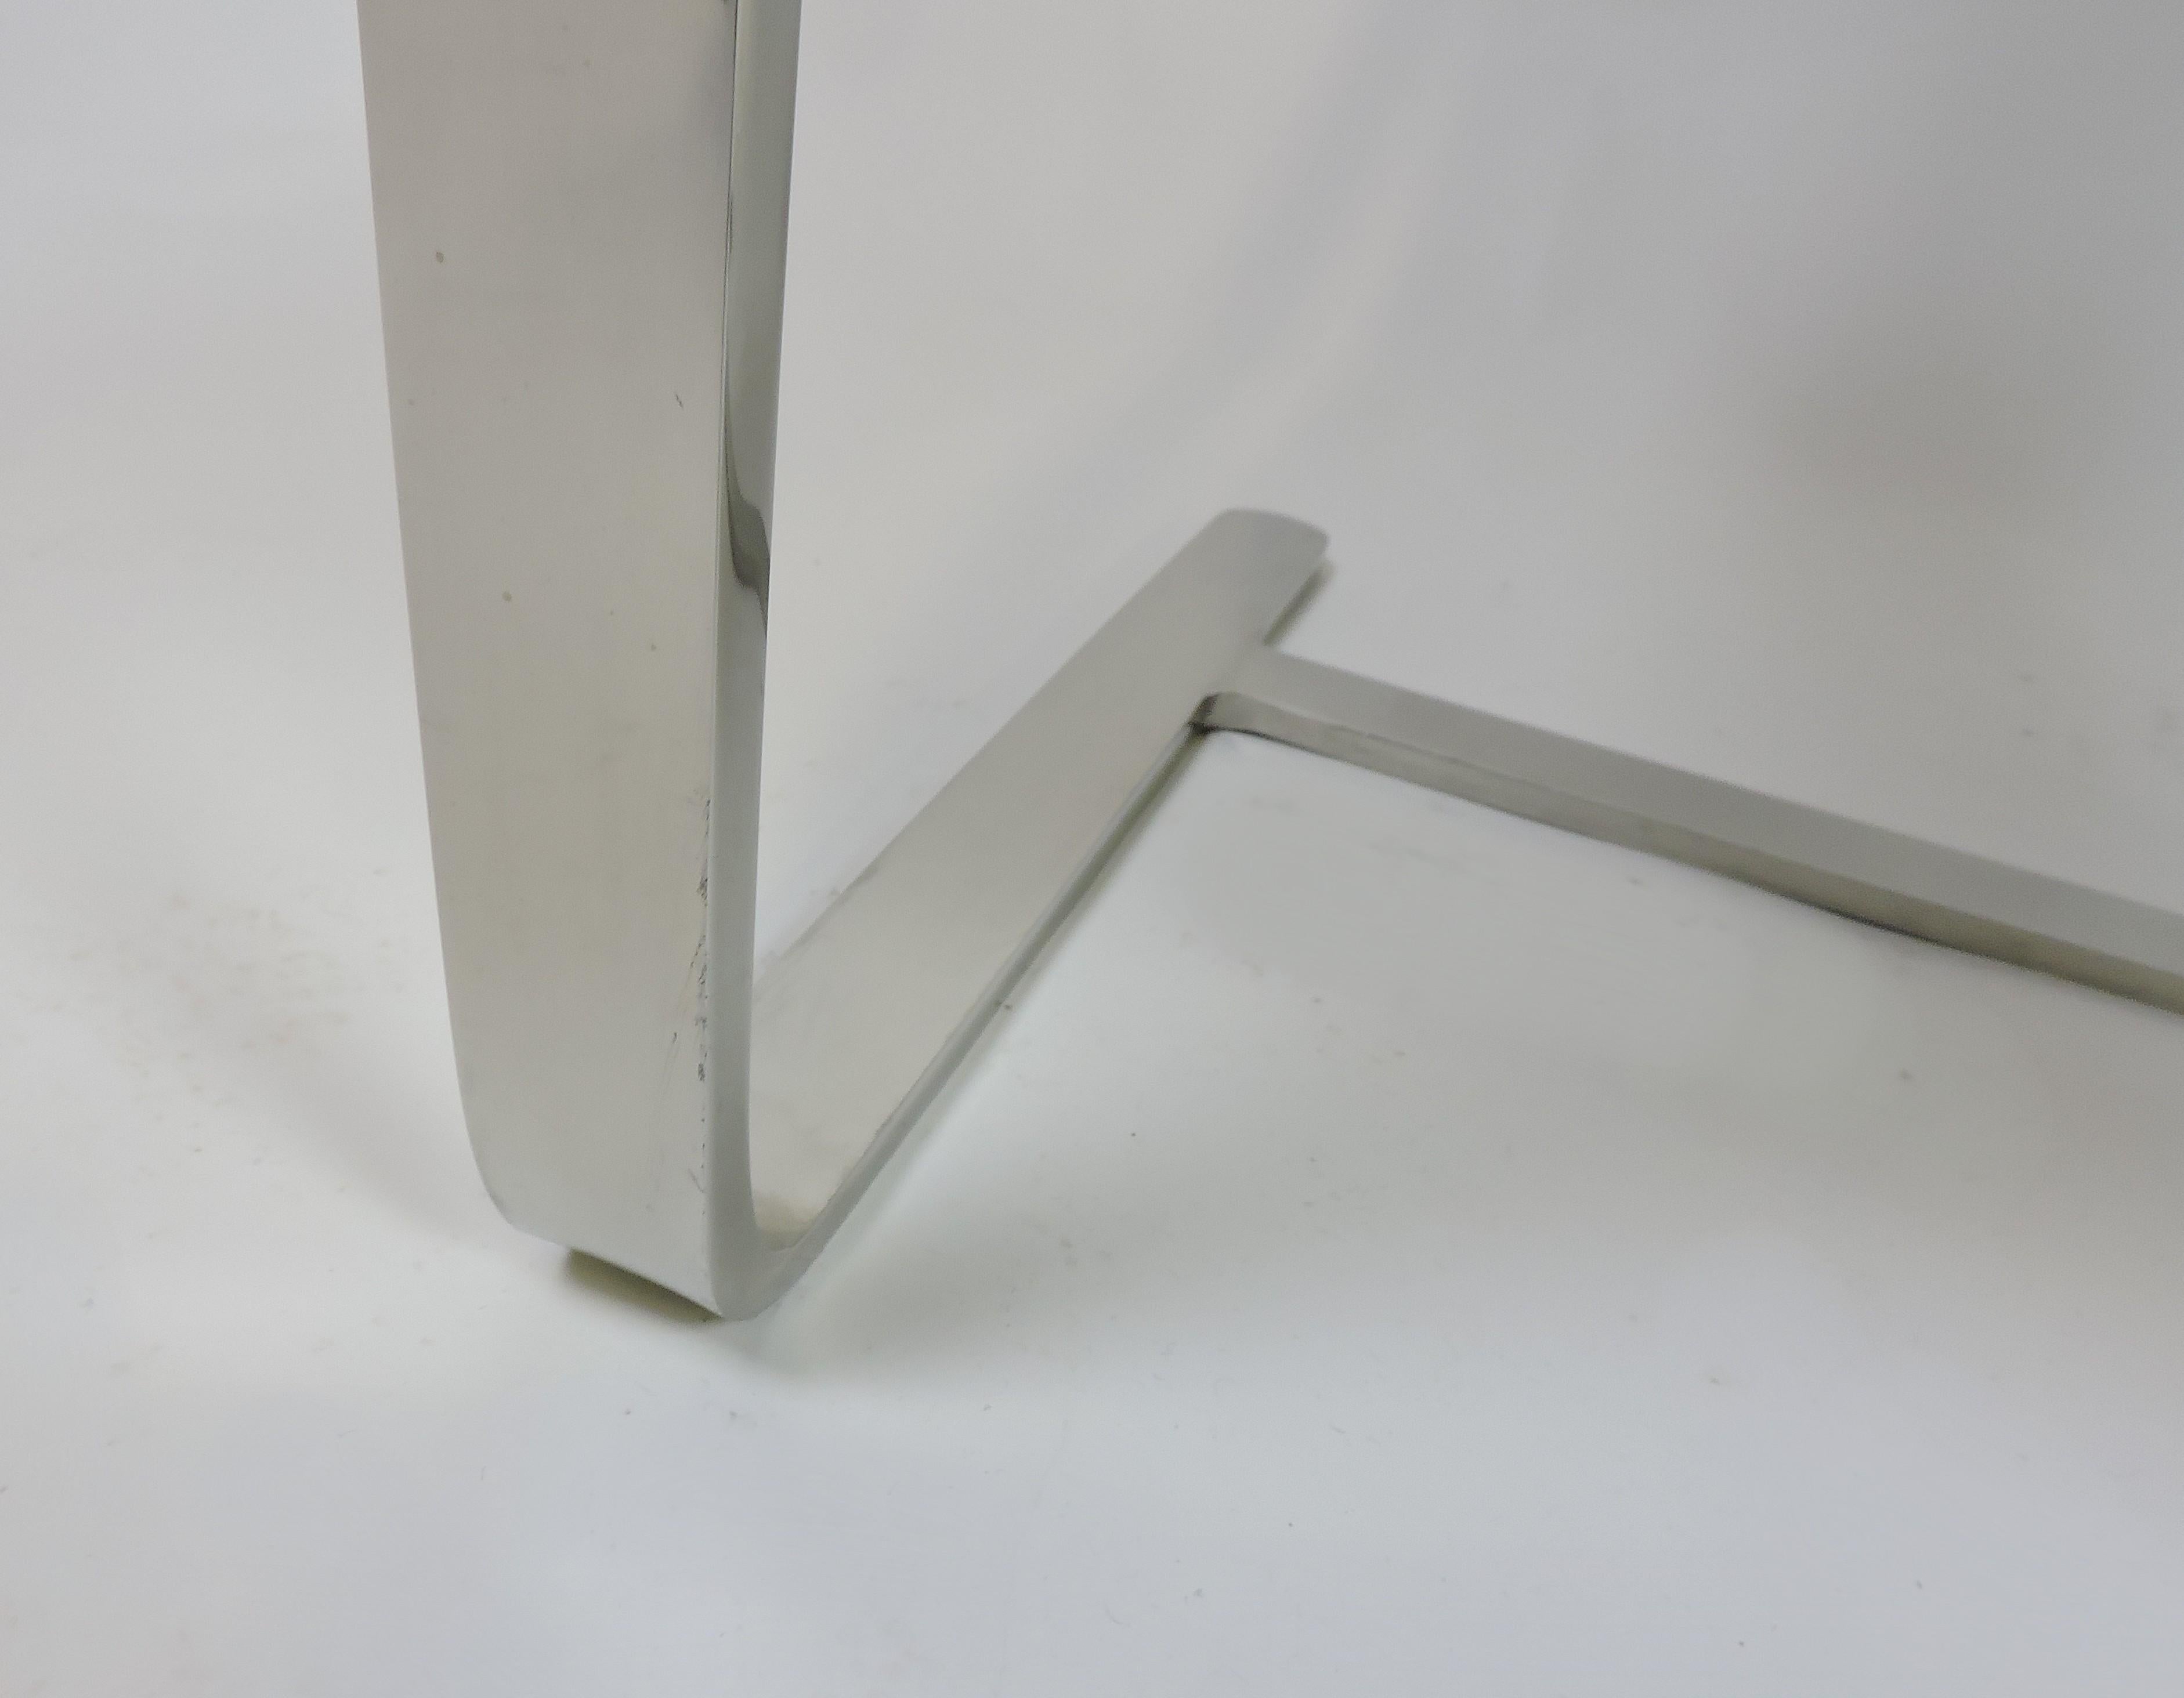 Late 20th Century Mies van der Rohe Brno Stainless Steel Flat Bar Chair for Knoll